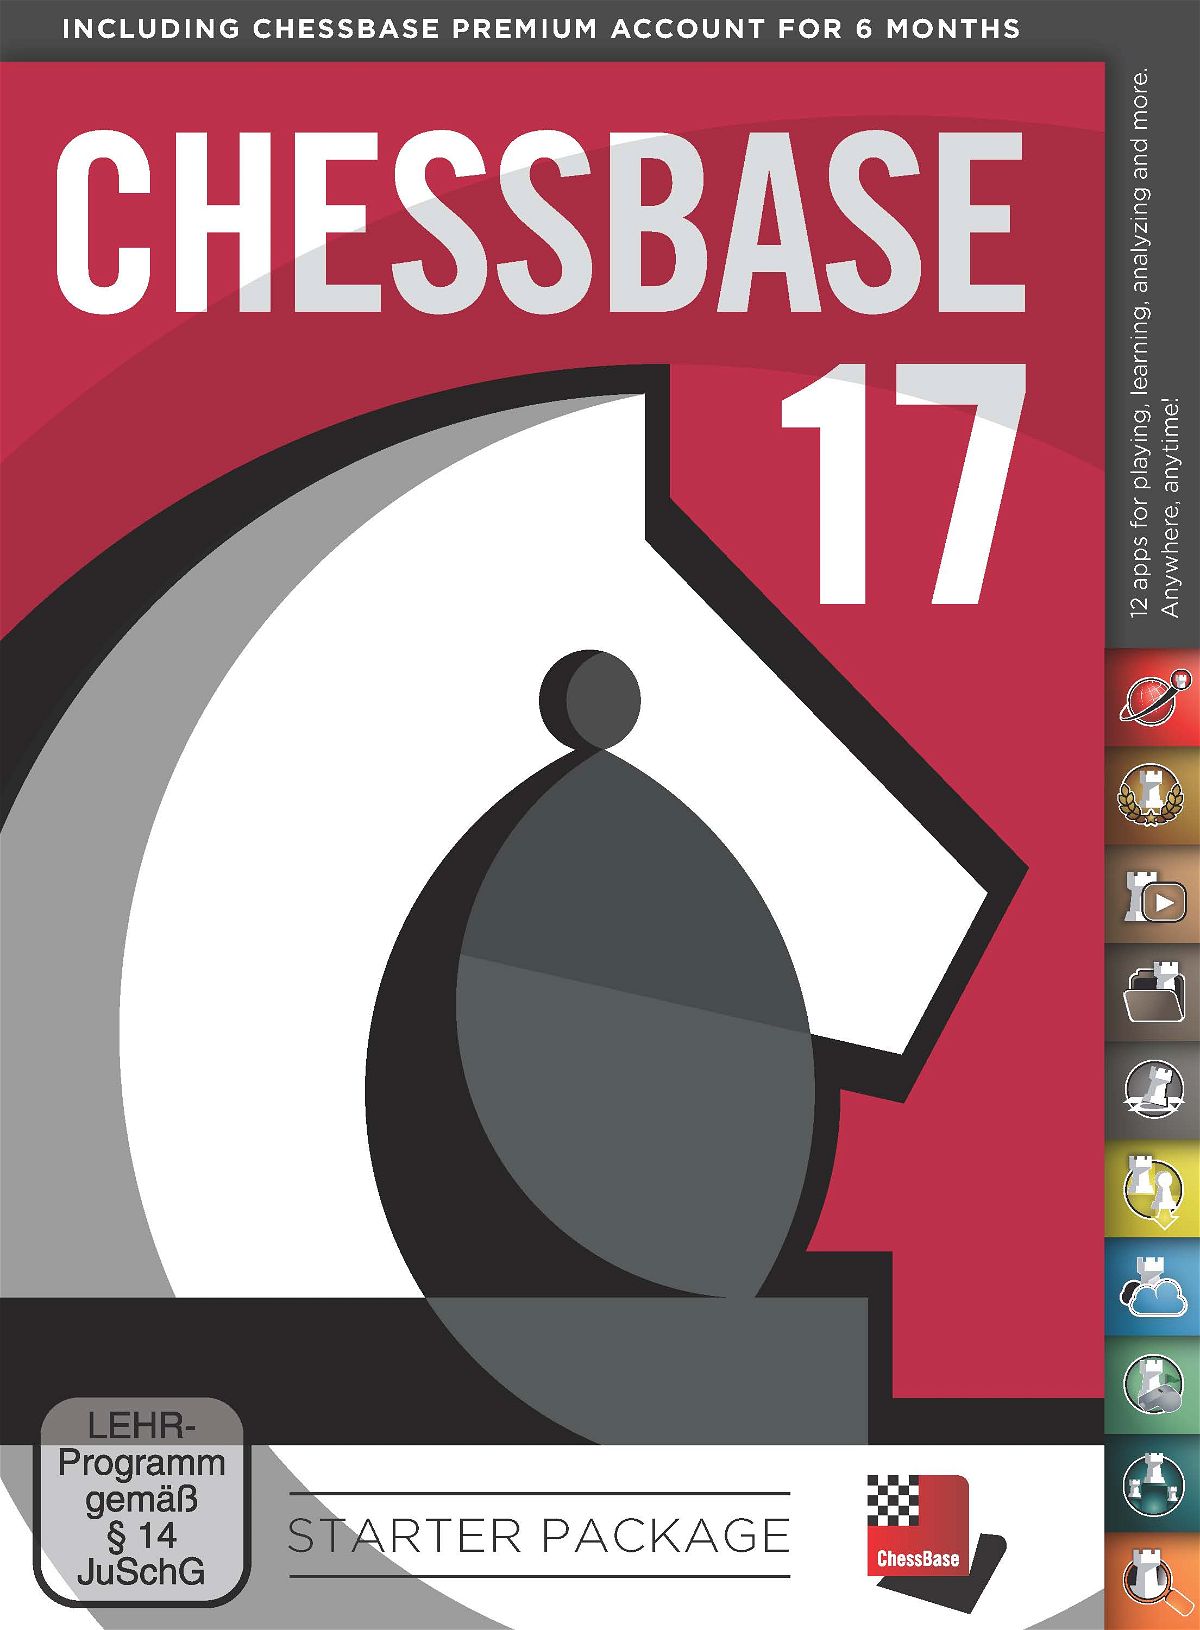 At ChessBase India one of the things we have always wanted to do is make  good quality books available to Indians at affordable prices. This…